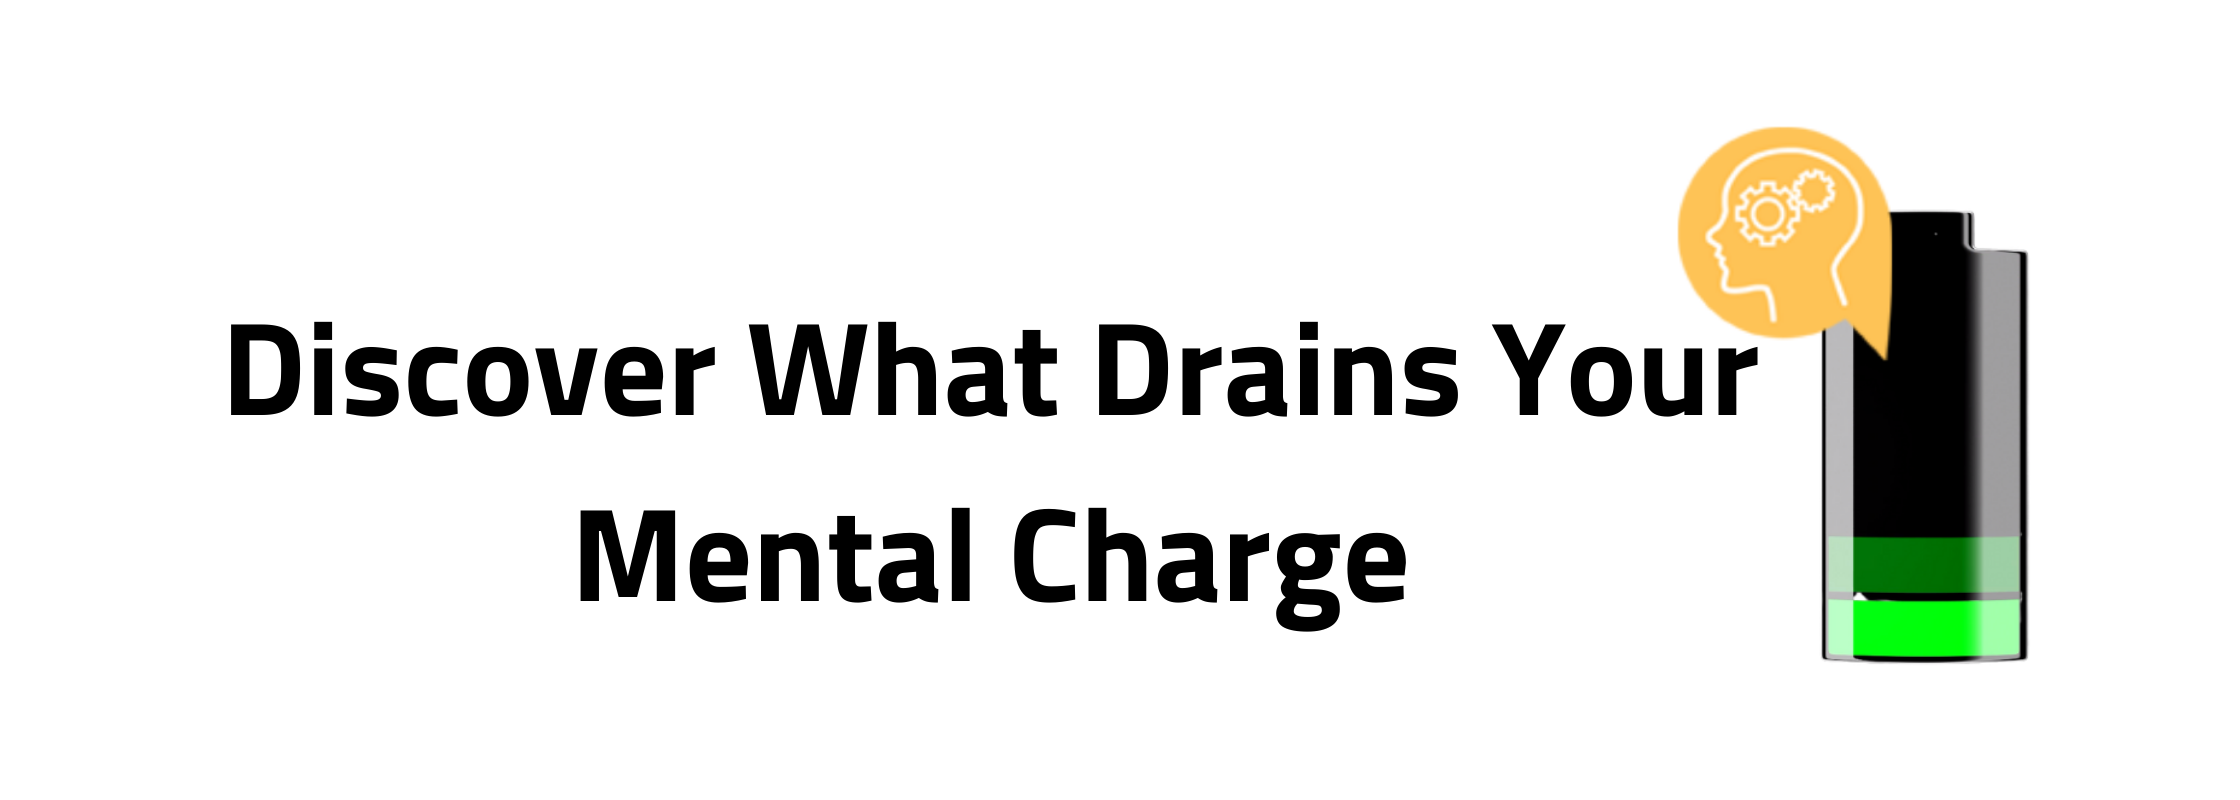 Discover What Drains Your Mental Charge